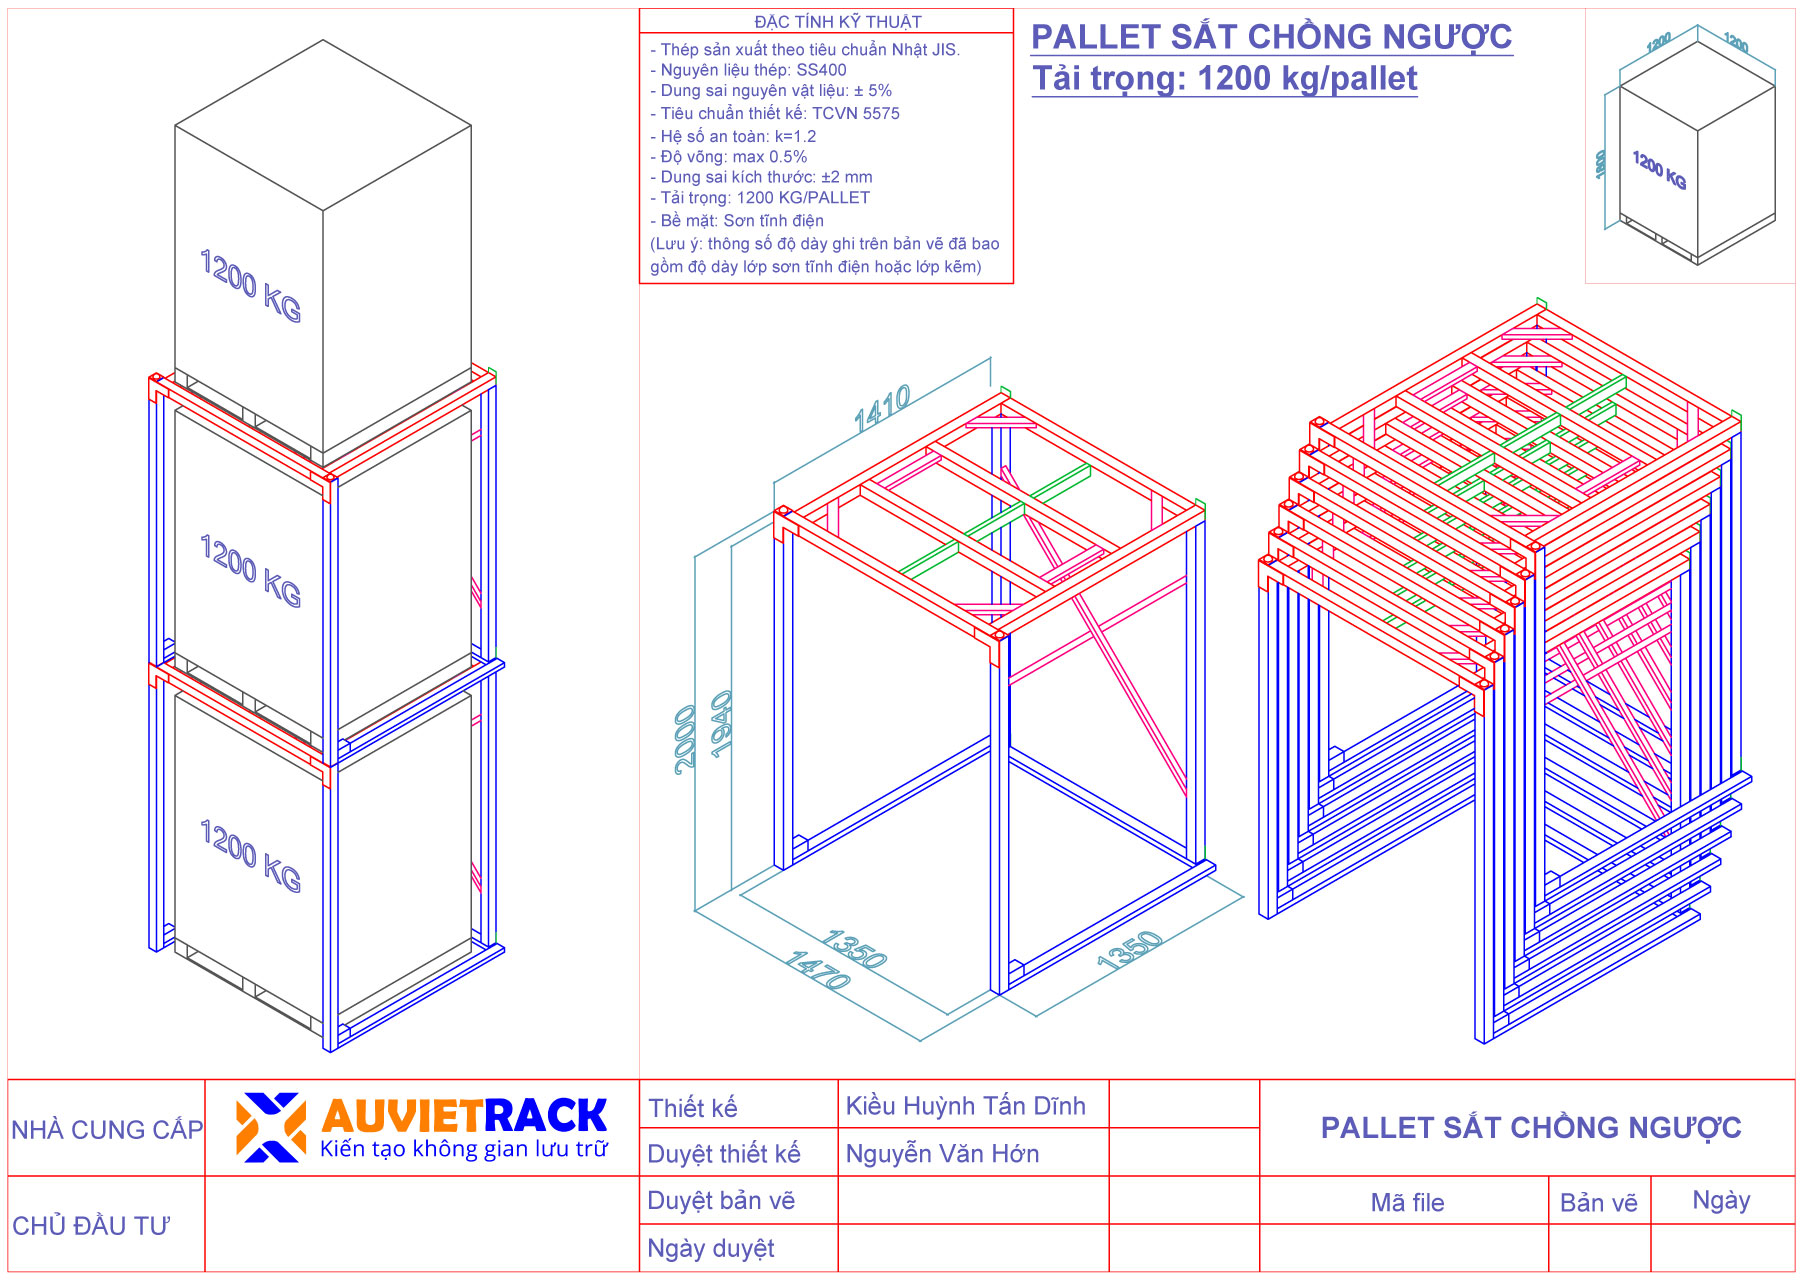 3D DRAWING OF INVERTED STACKING STEEL PALLET Au Viet Rack